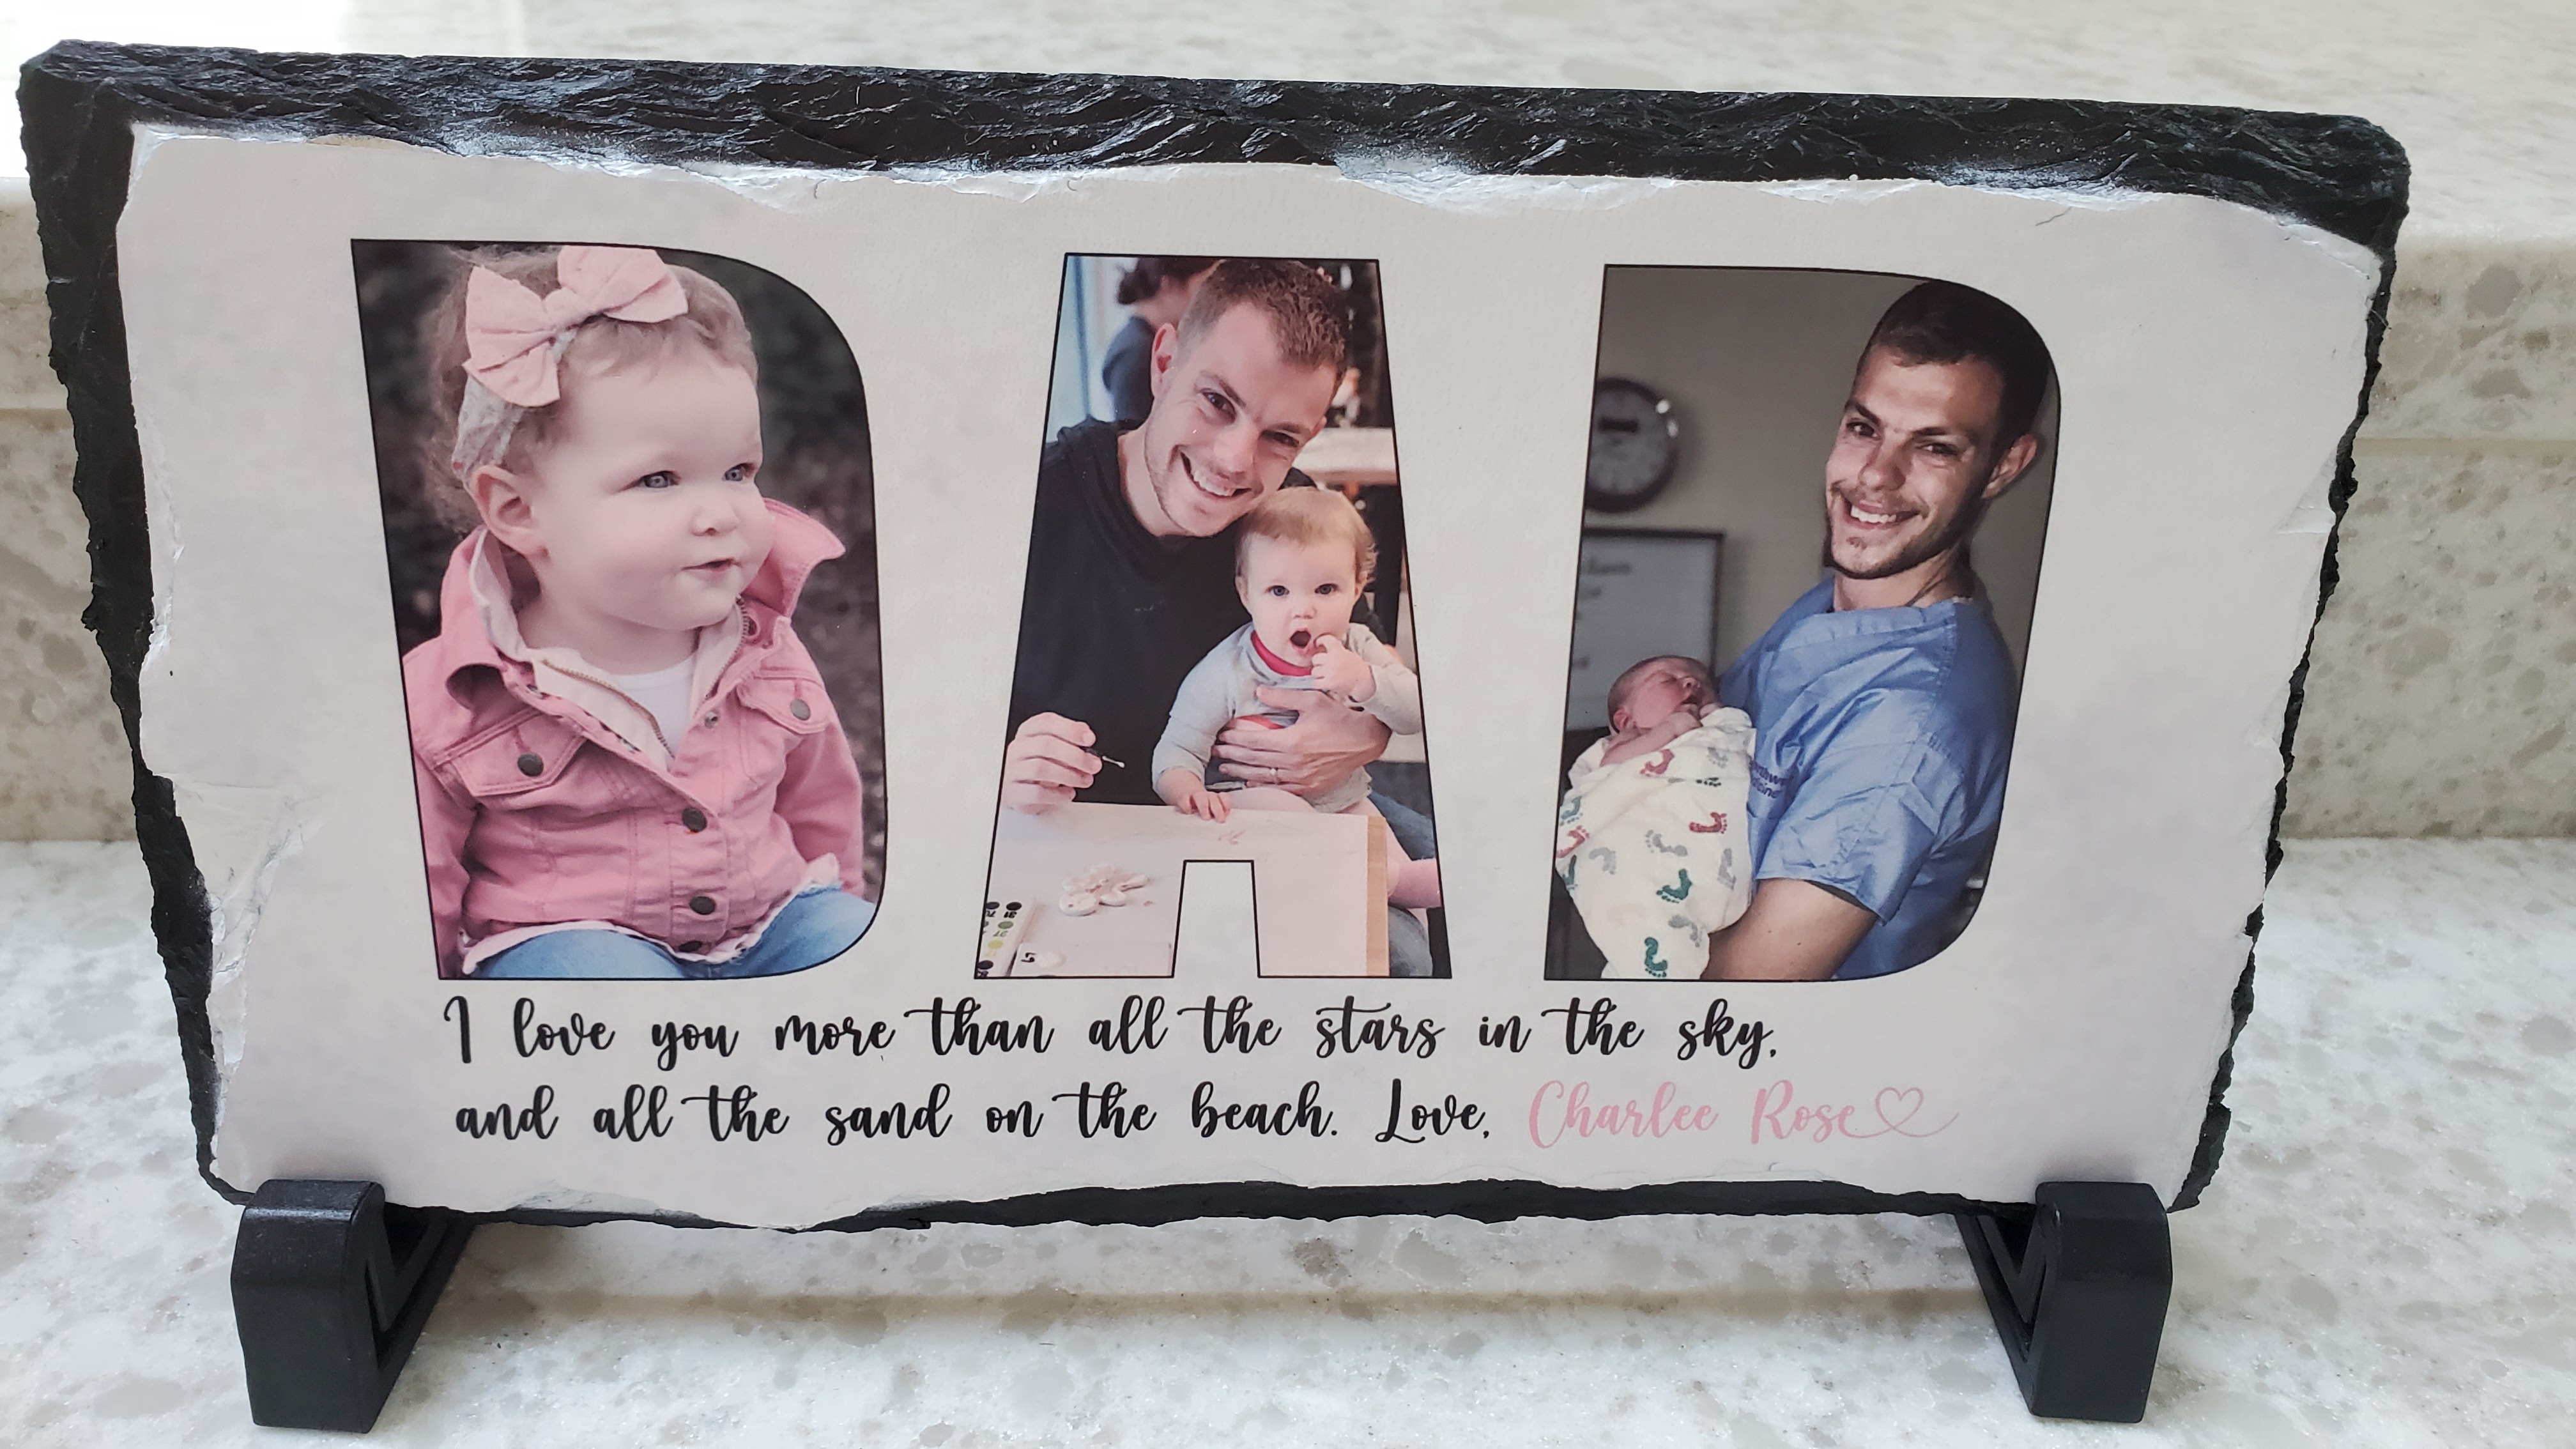 Using chunky letters, I put my granddaughter's photos into 